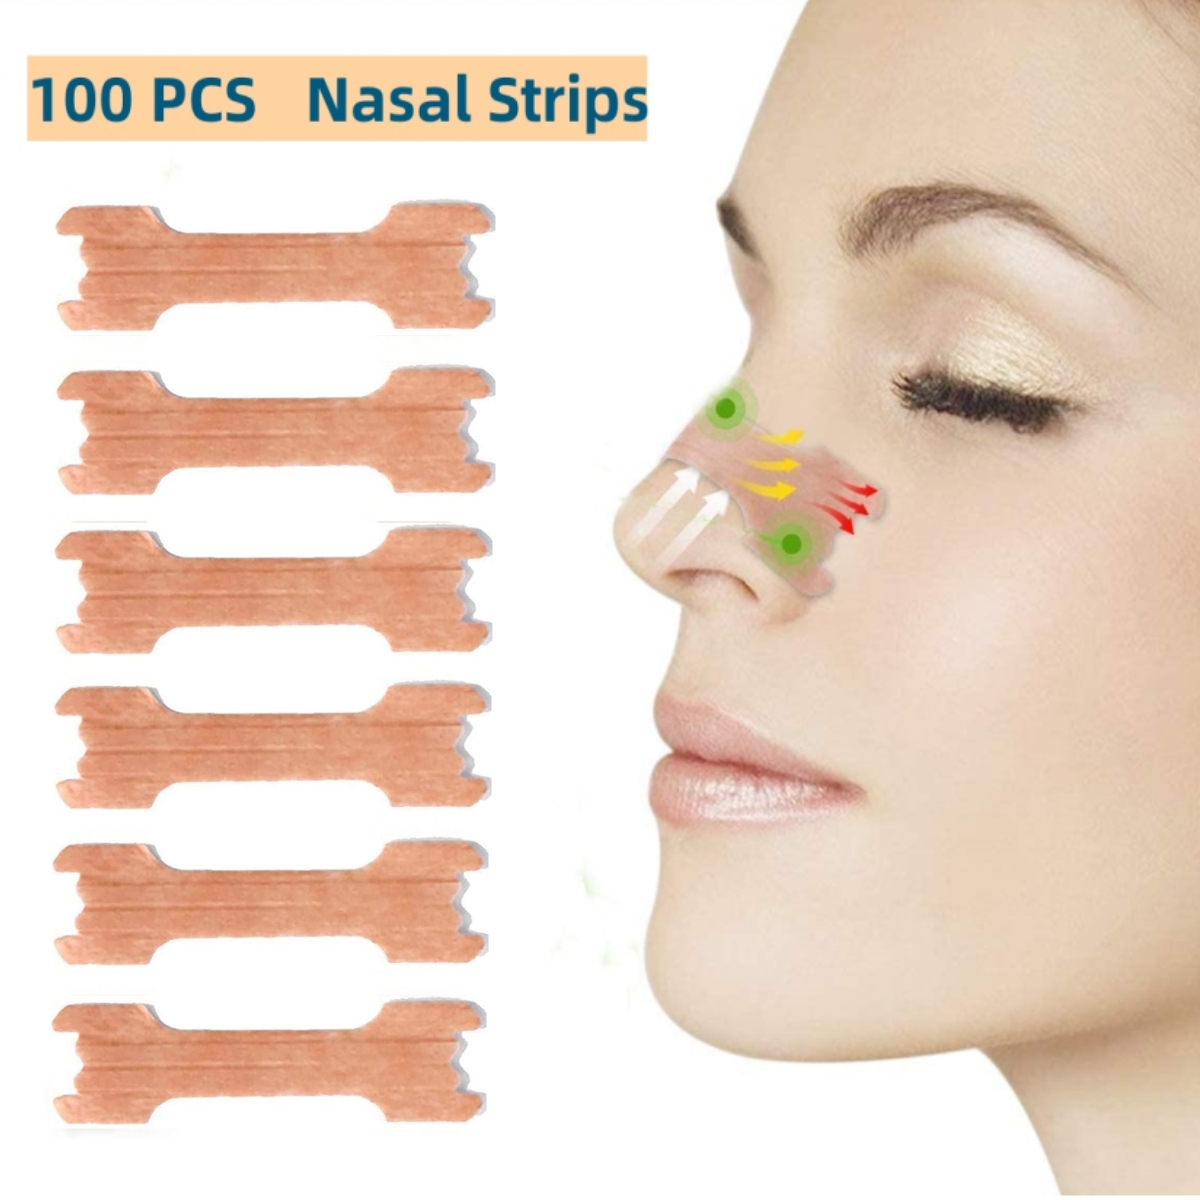 Breathe Right - Browse Our Nasal Strips